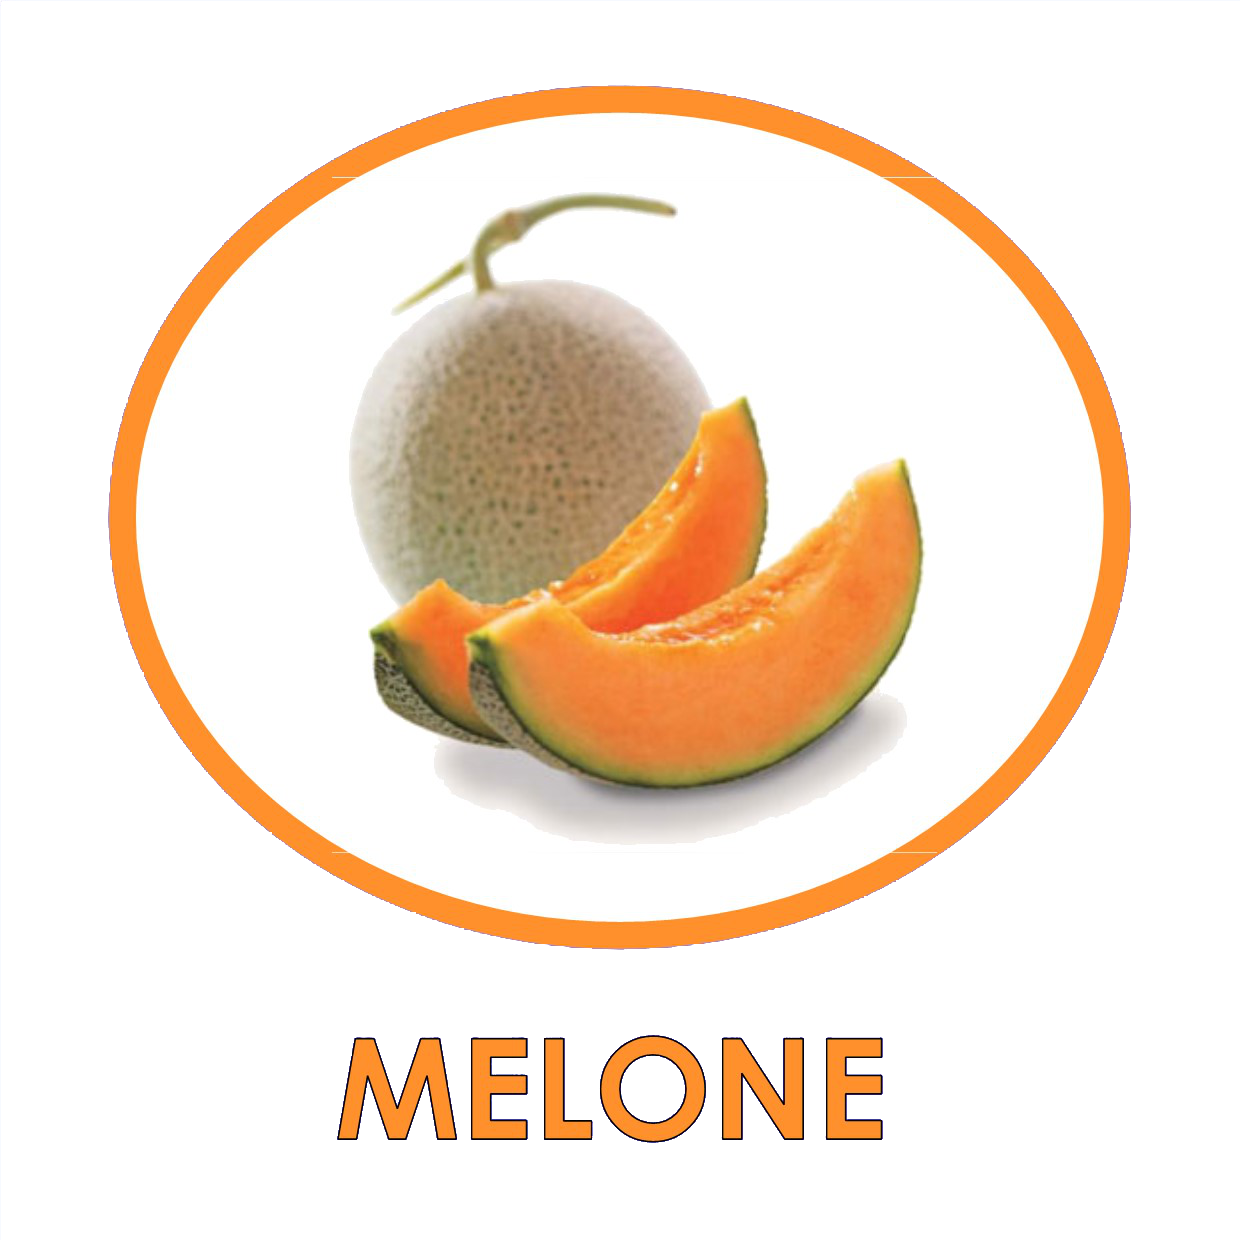 MELONE.png